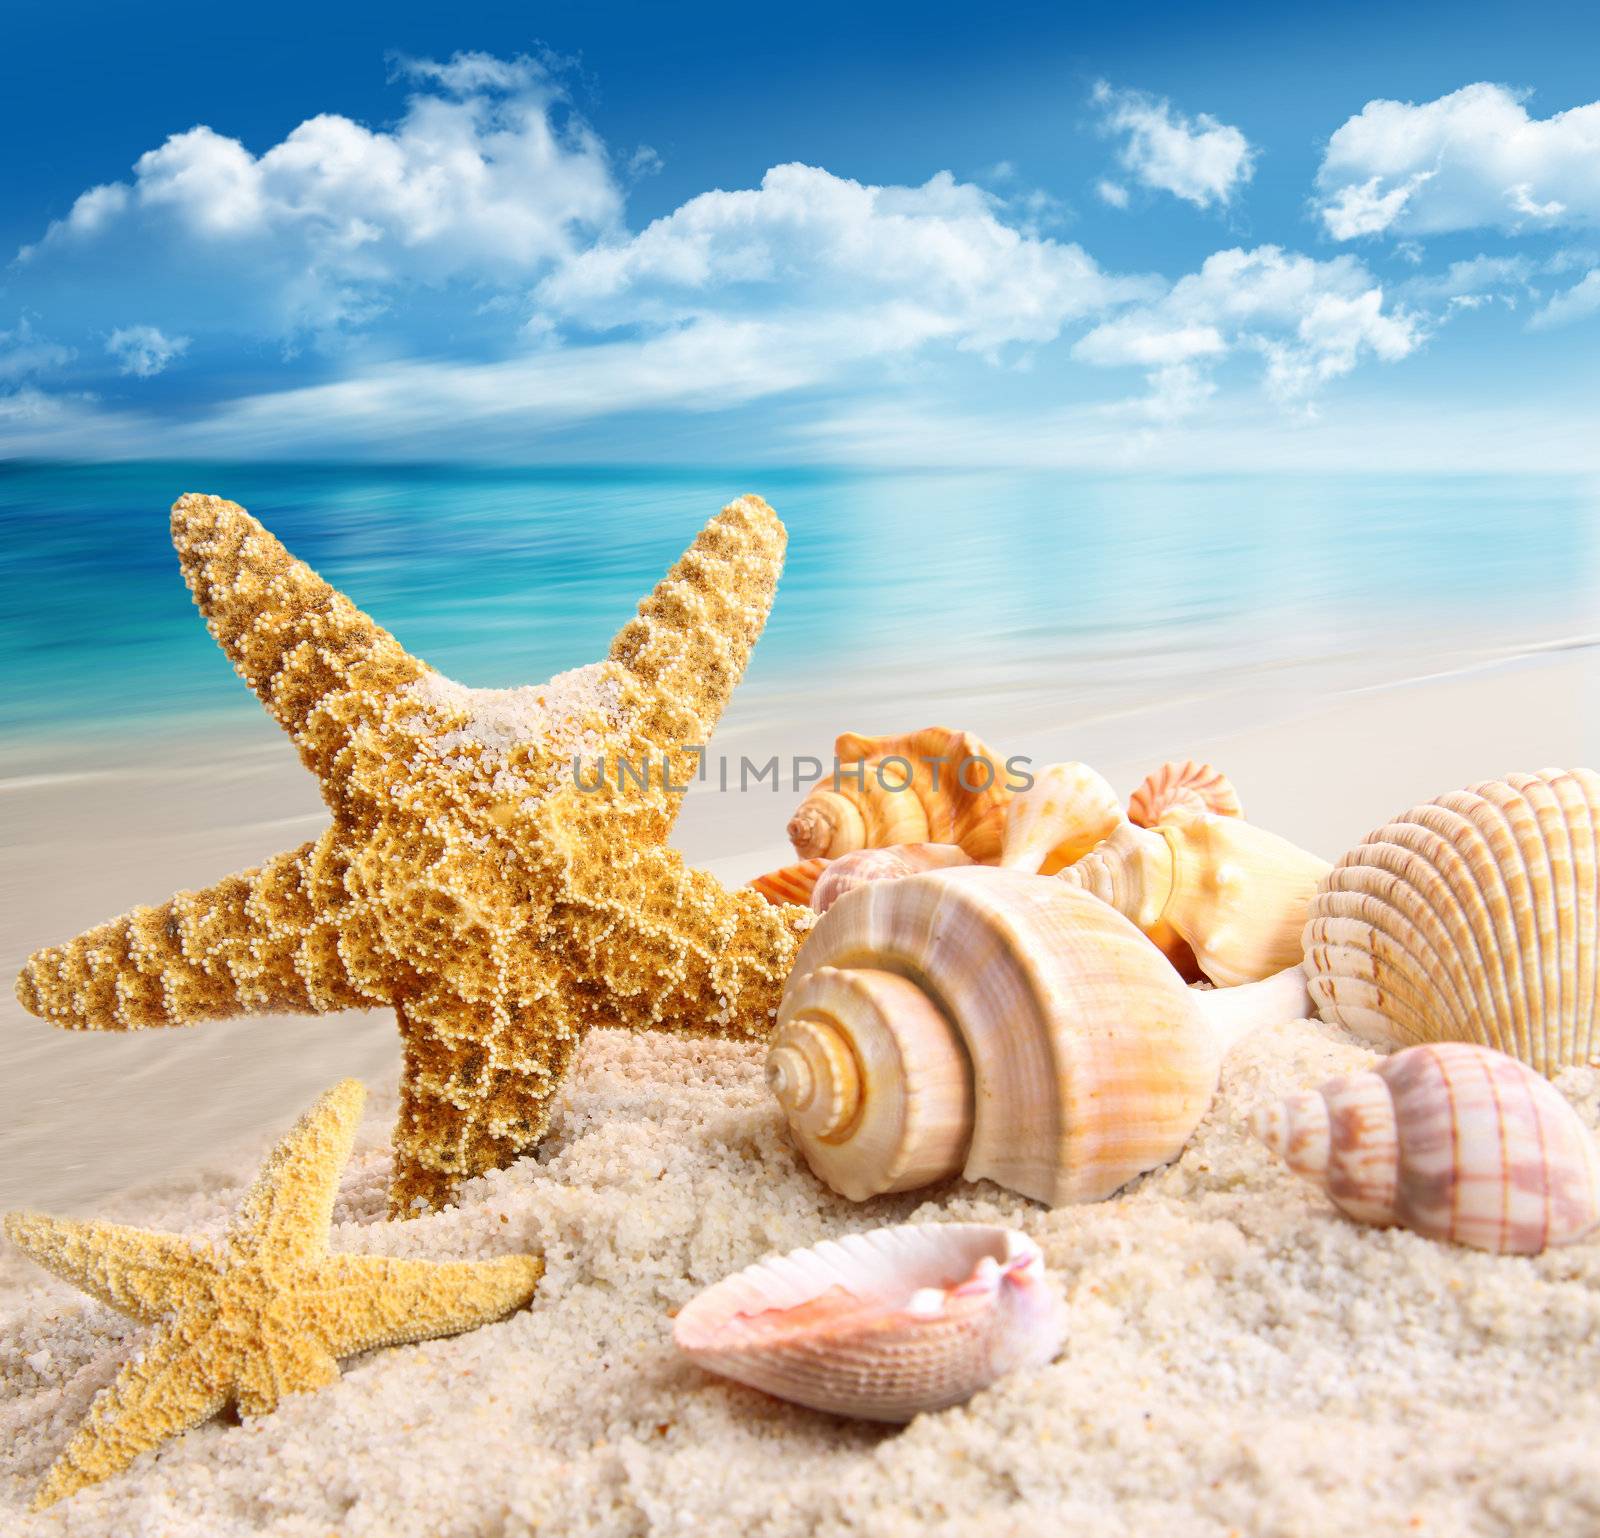 Starfish and seashells on the beach by Sandralise